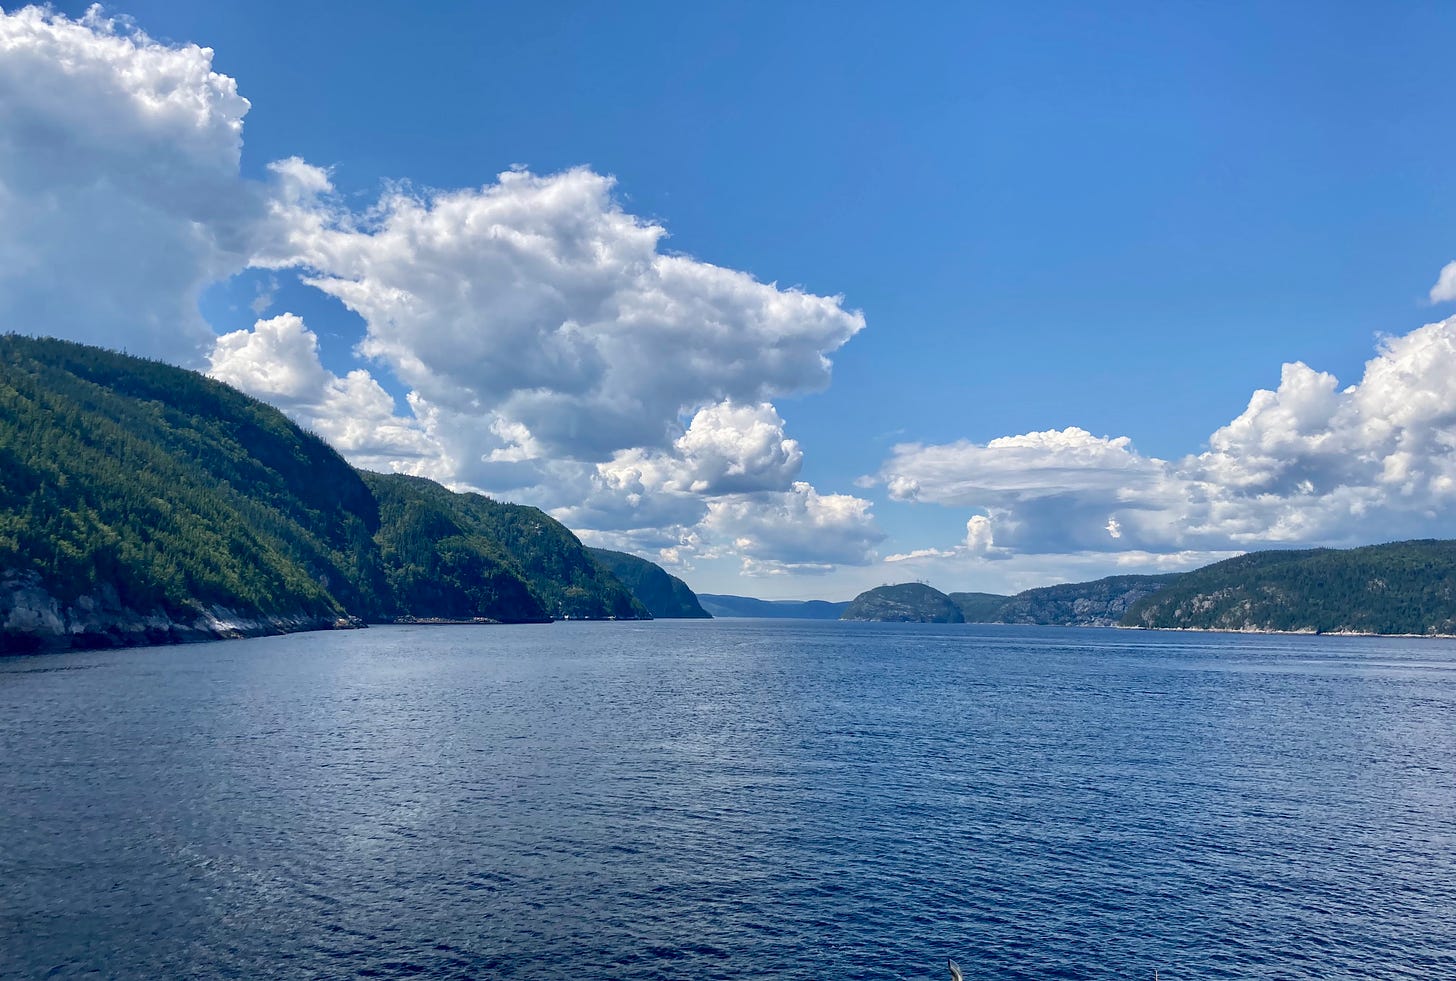 A wide view of the Saguenay River between two high green banks. The sky is blue with large clouds.